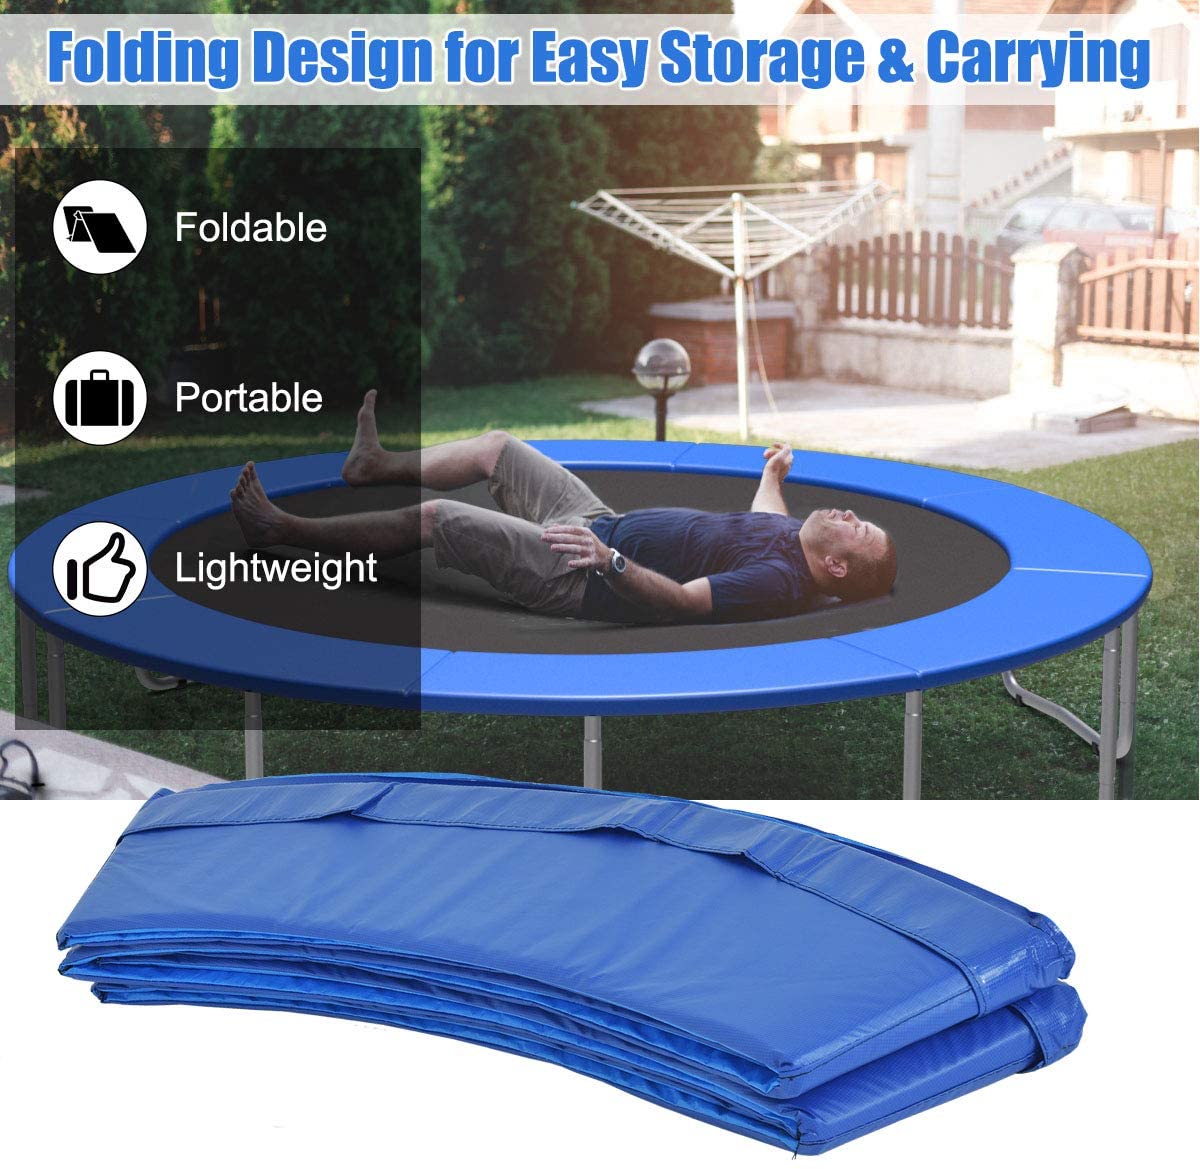 12 Ft Round Trampoline Spring Cover Replacement Safety Pad